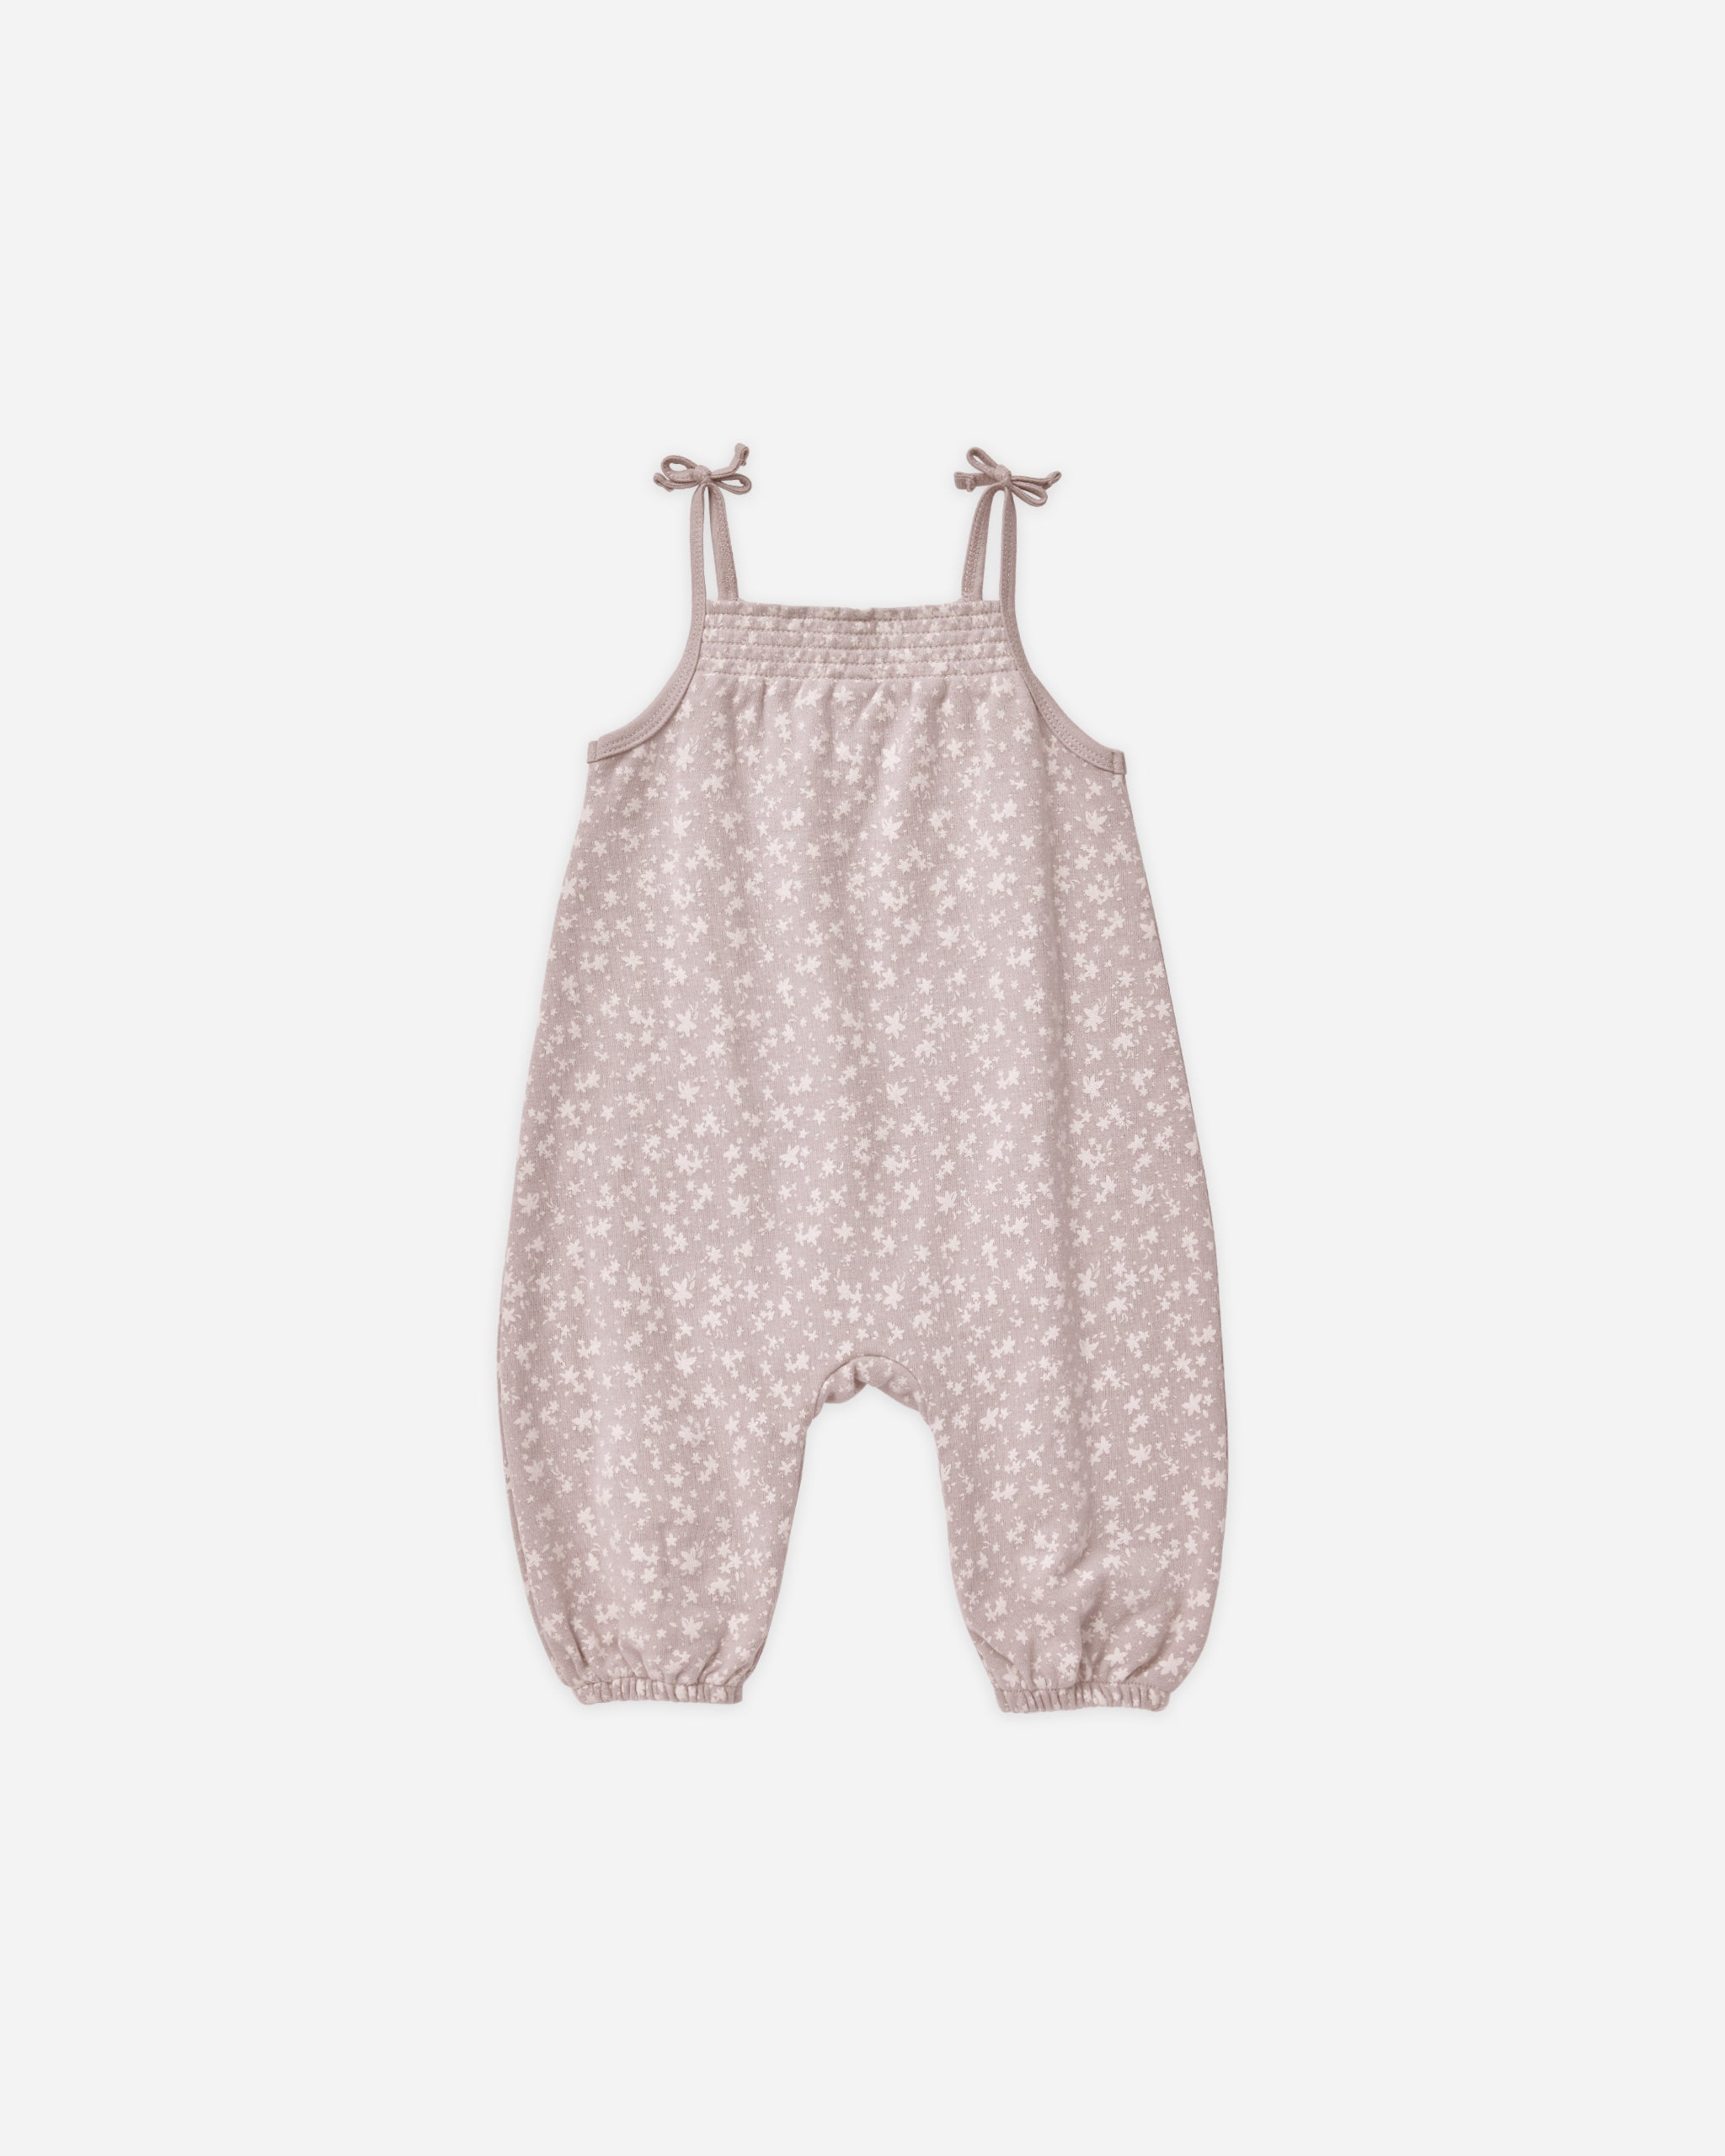 Smocked Jumpsuit || Scatter - Rylee + Cru | Kids Clothes | Trendy Baby Clothes | Modern Infant Outfits |